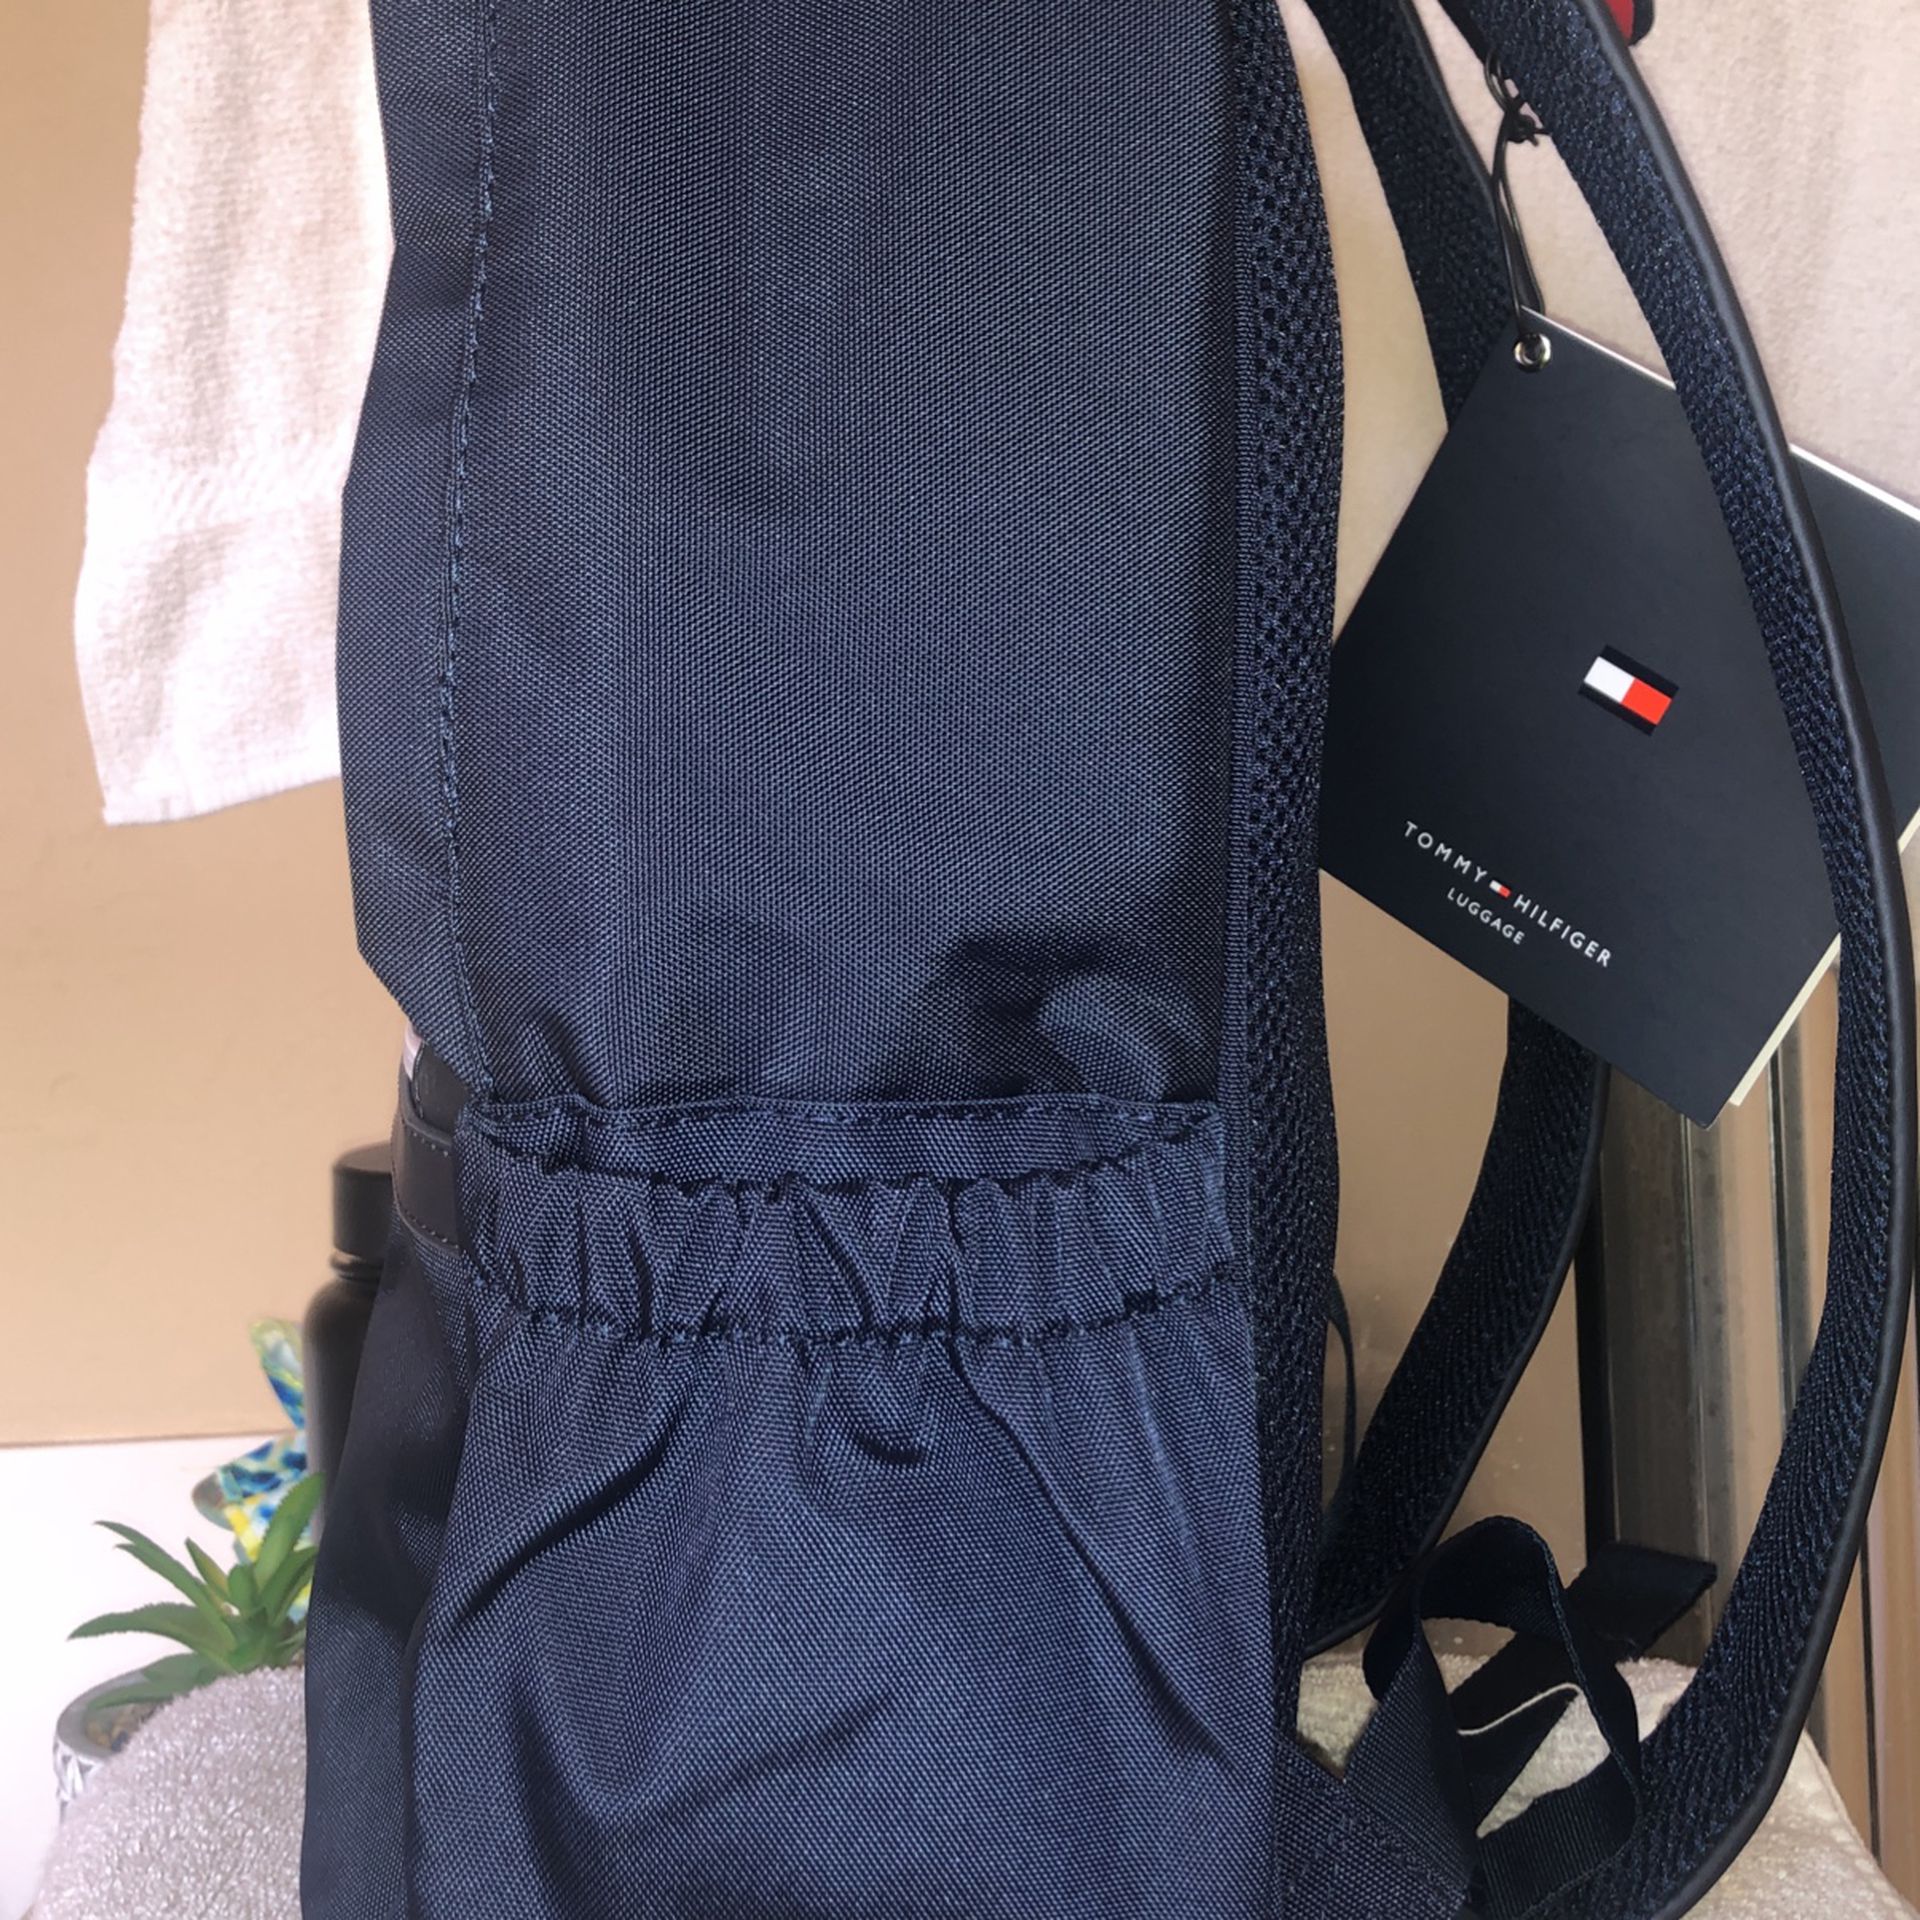 Tommy Hilfiger Luggage Backpack Brand New!